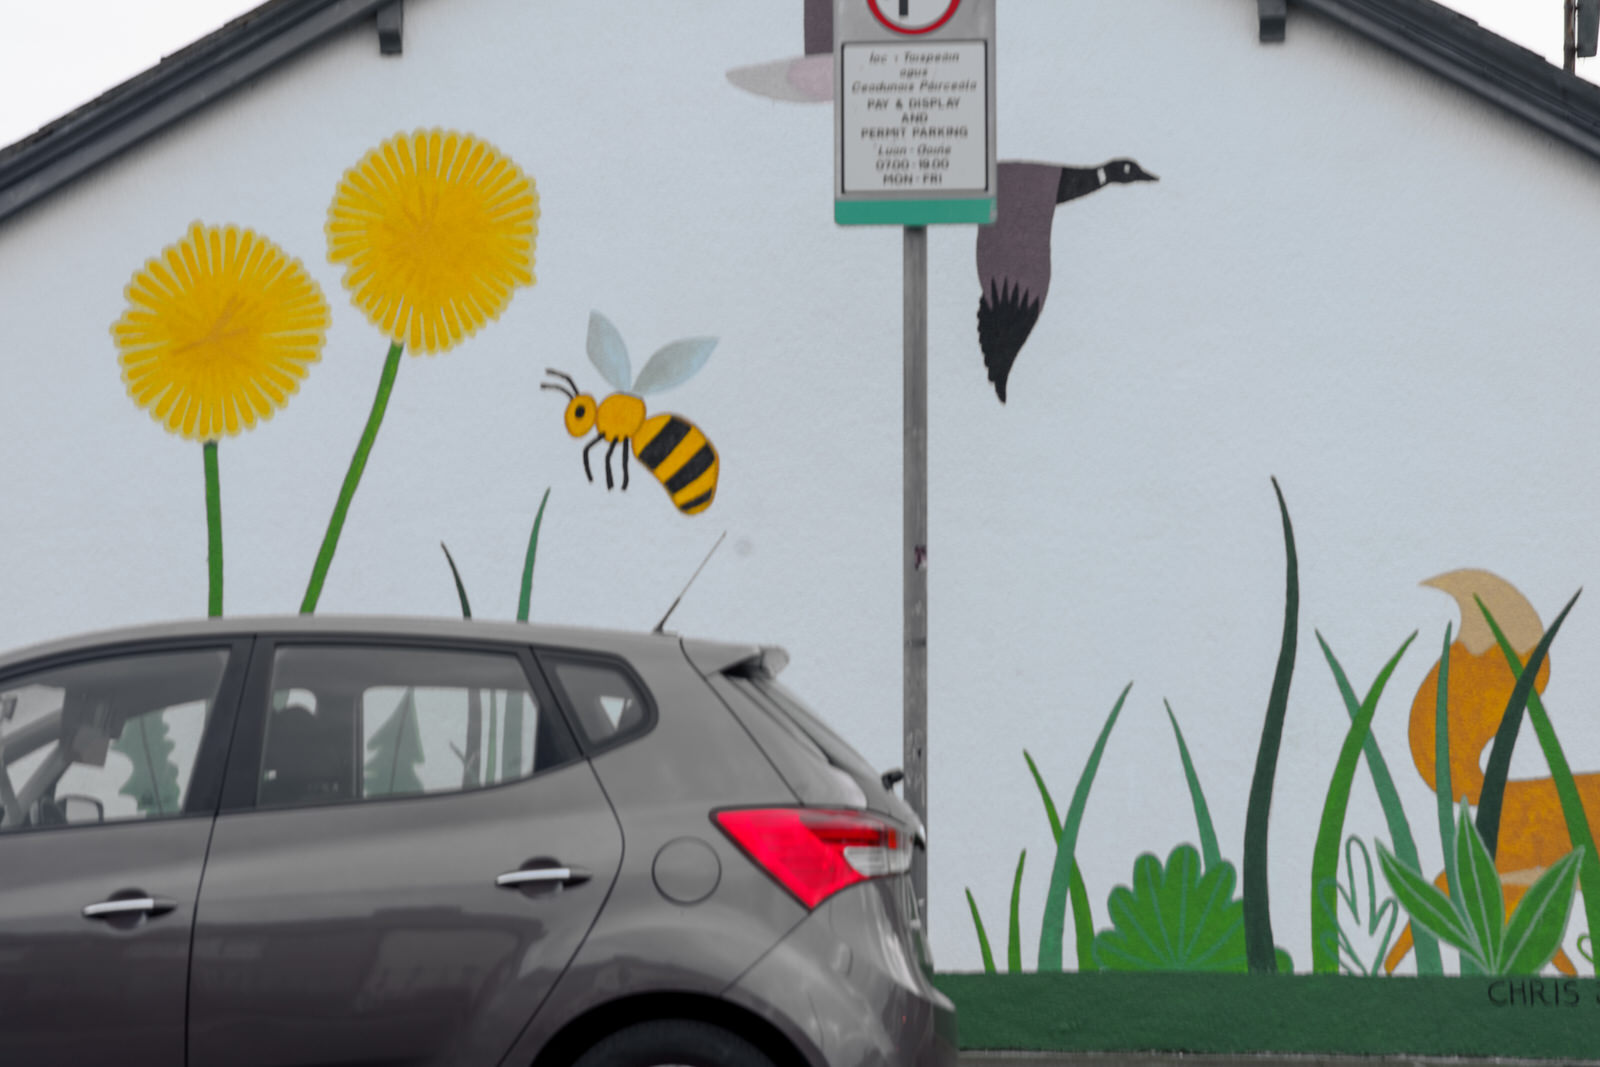 MURAL BY CHRIS JUDGE IN STONEYBATTER